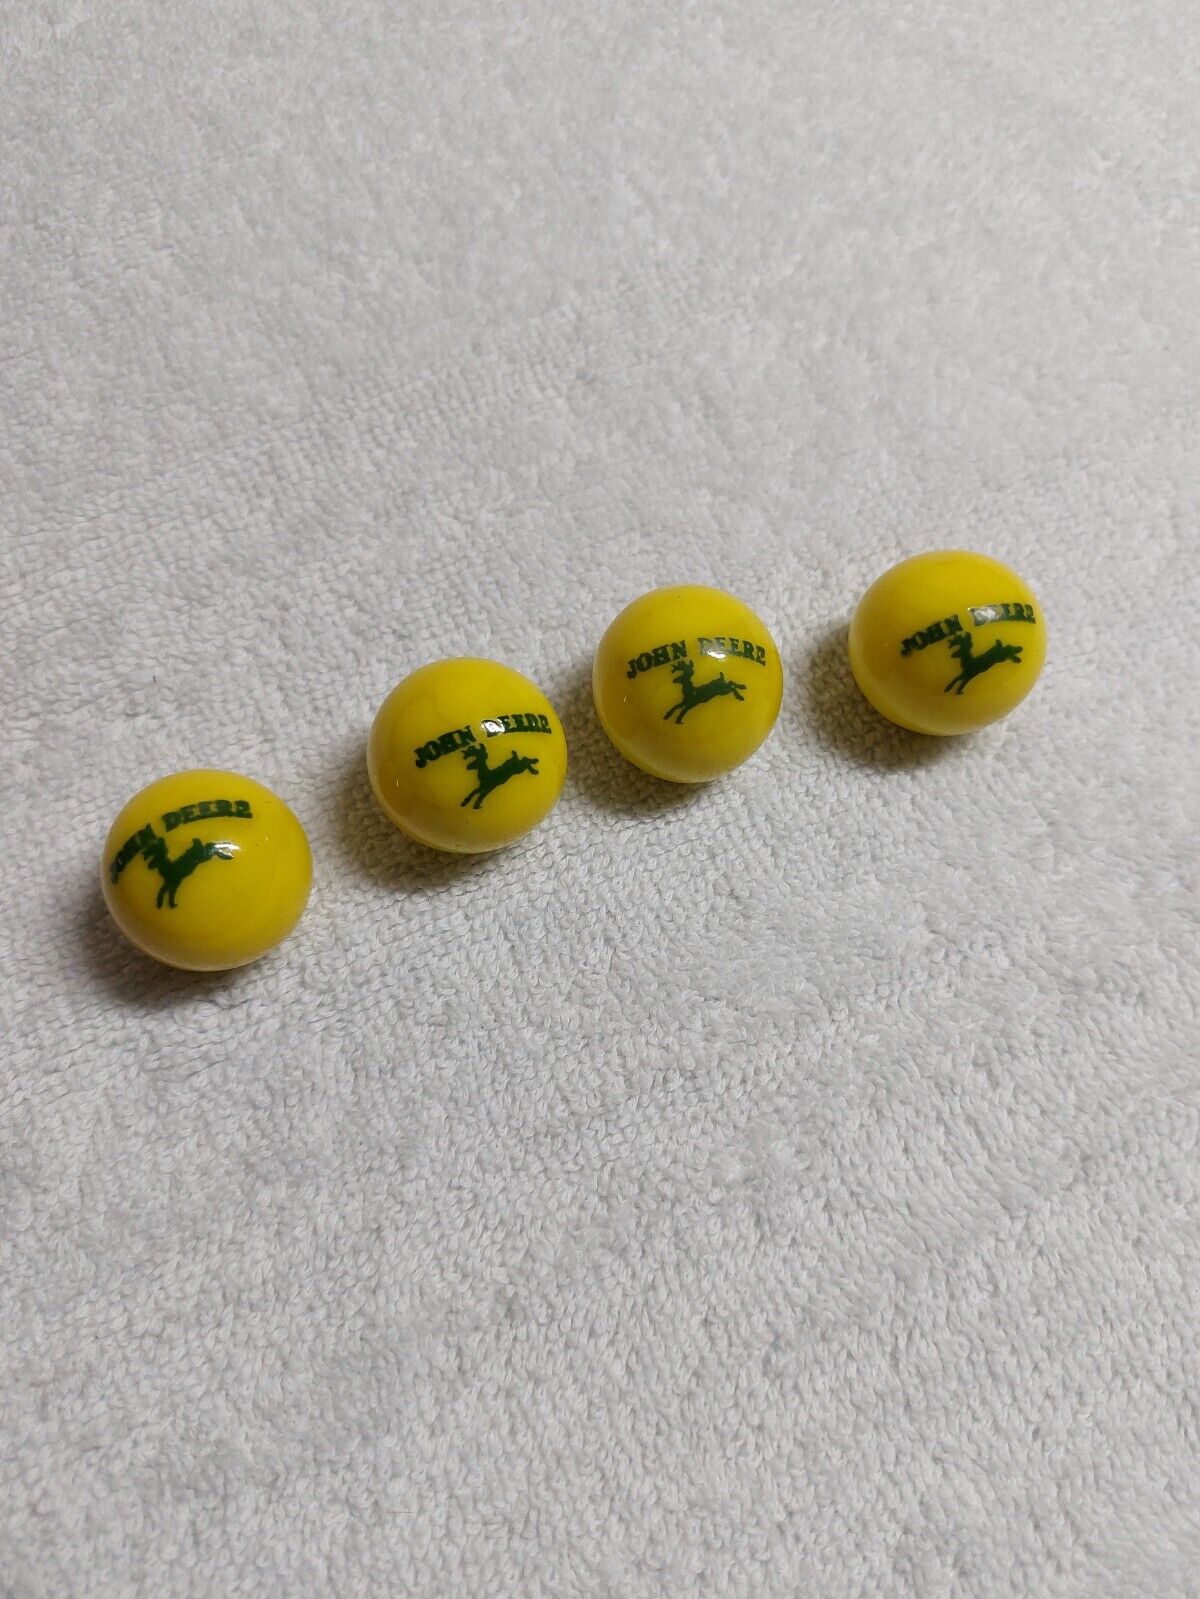 4 Vintage John Deere Yellow and Green Advertising Marbles